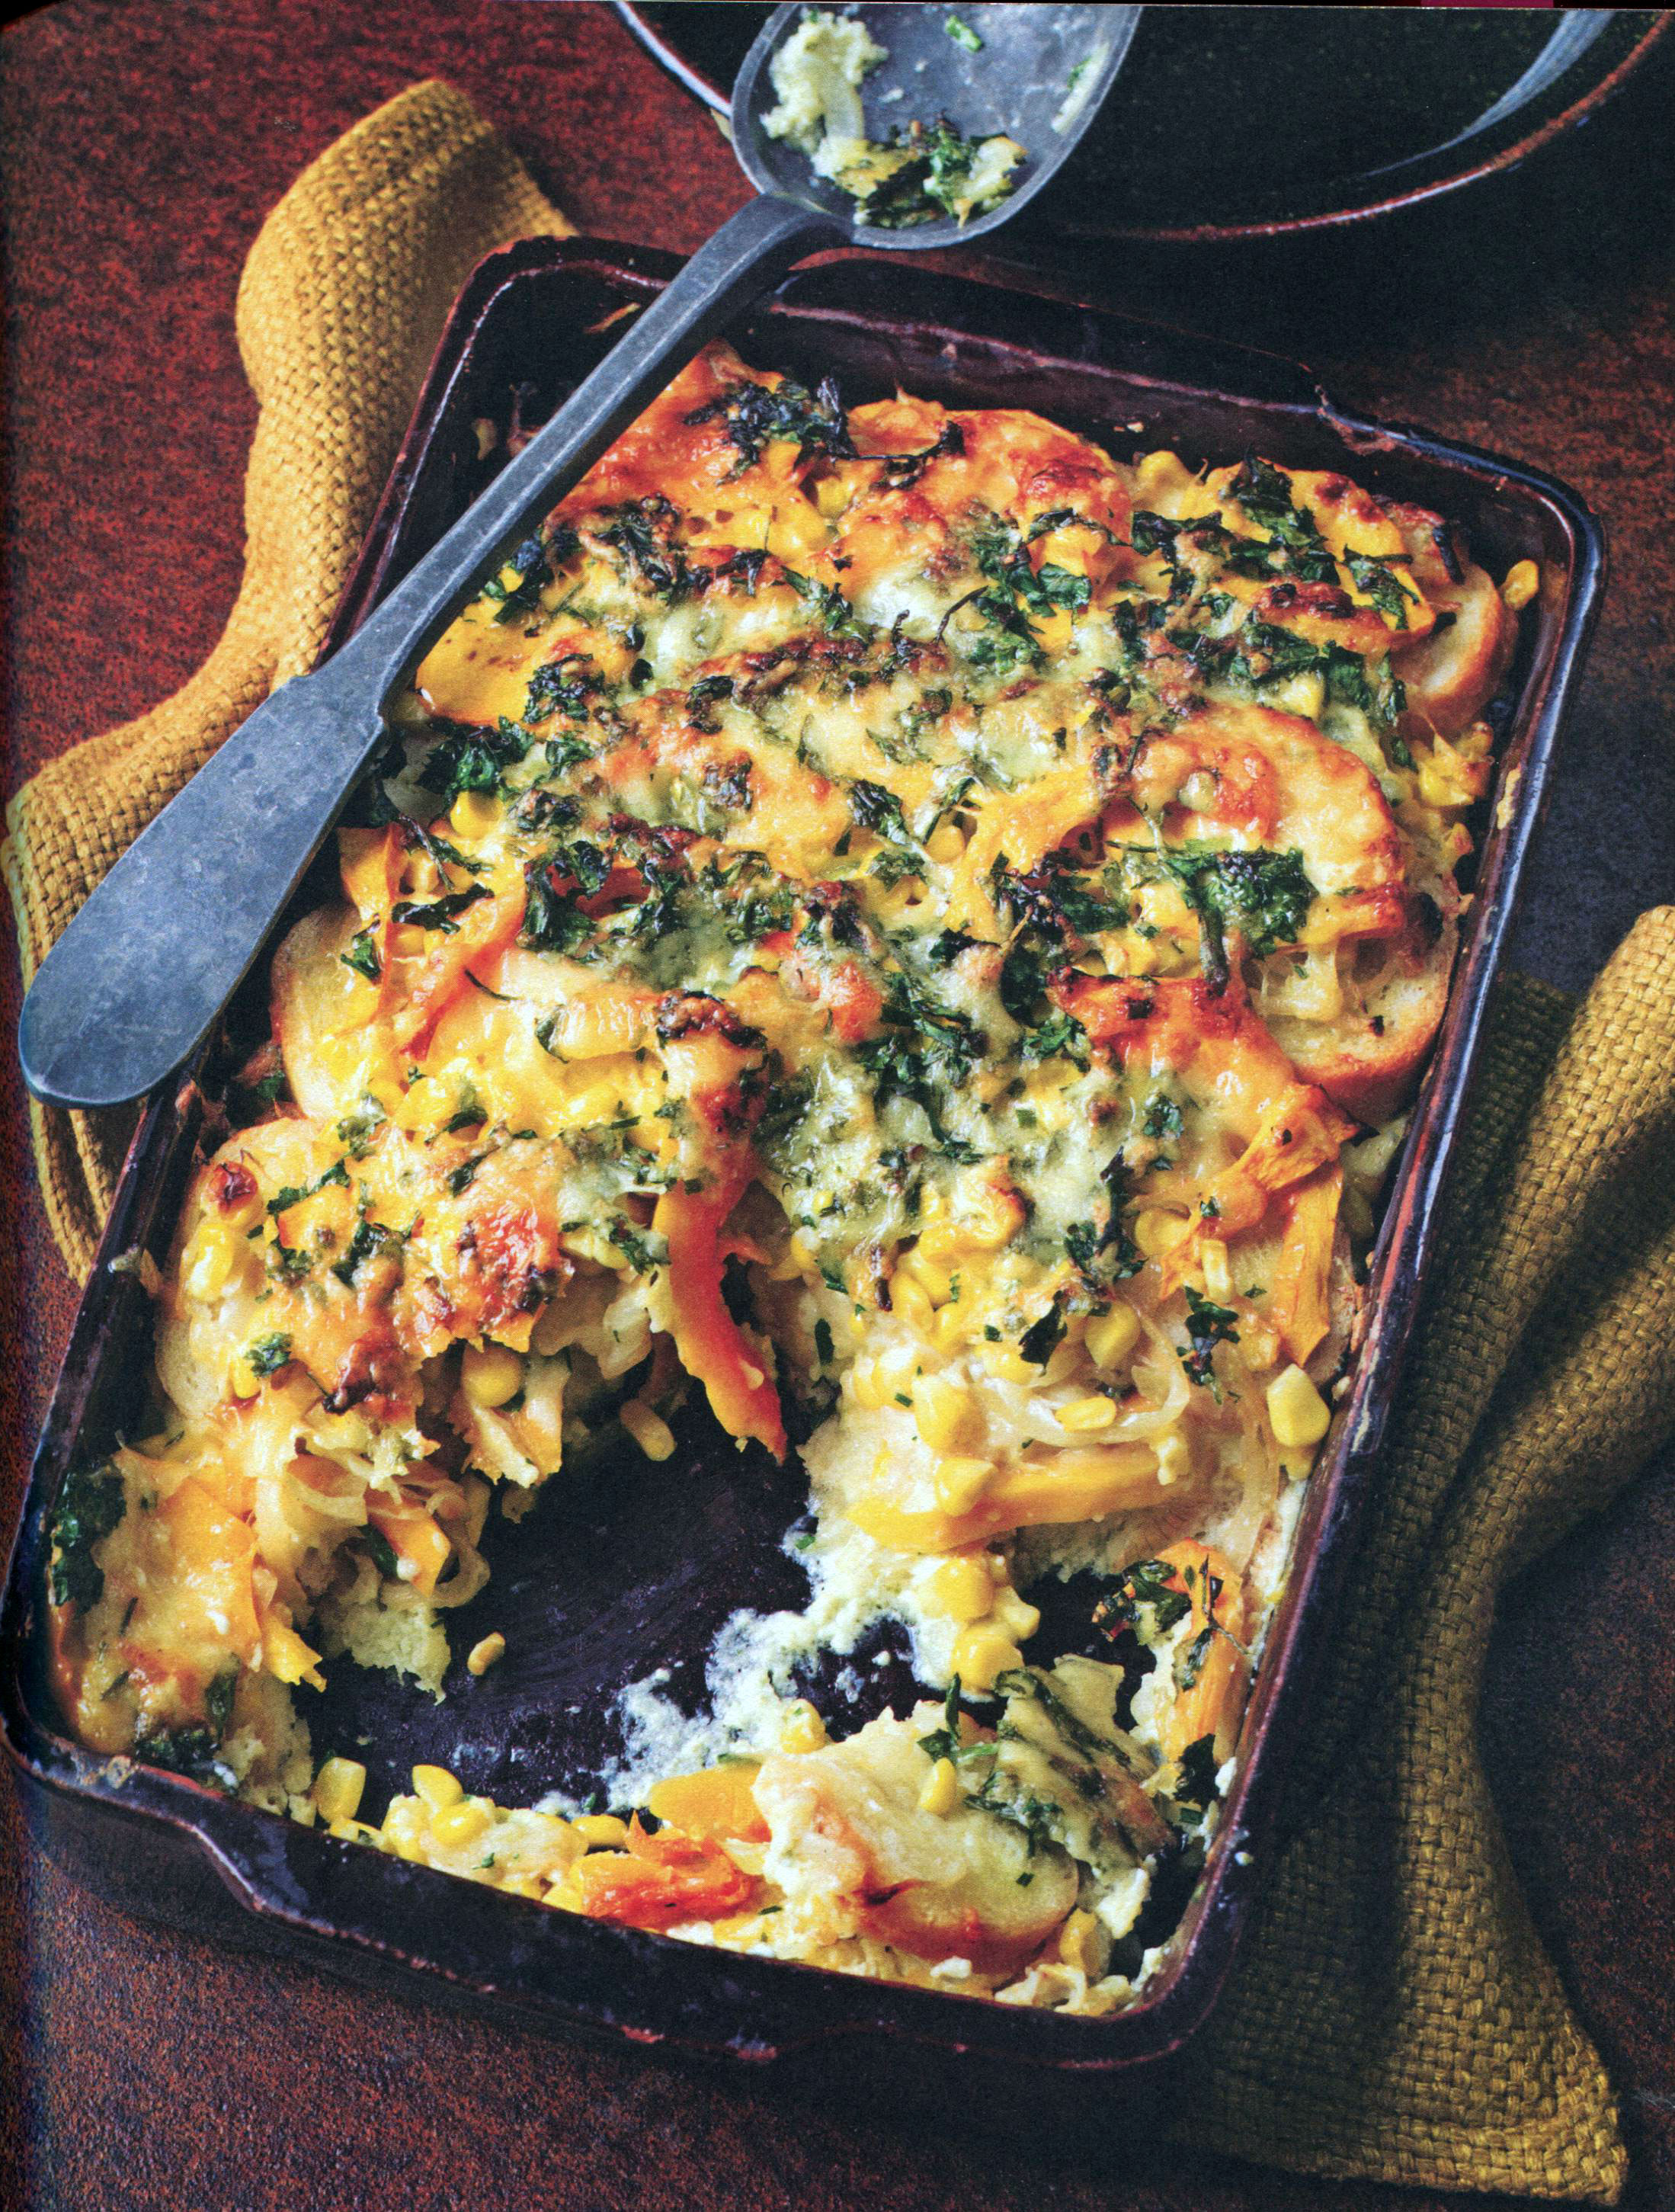 TBT Recipe: Butternut Squash, Corn and Bread Bake with Cheese and Chives